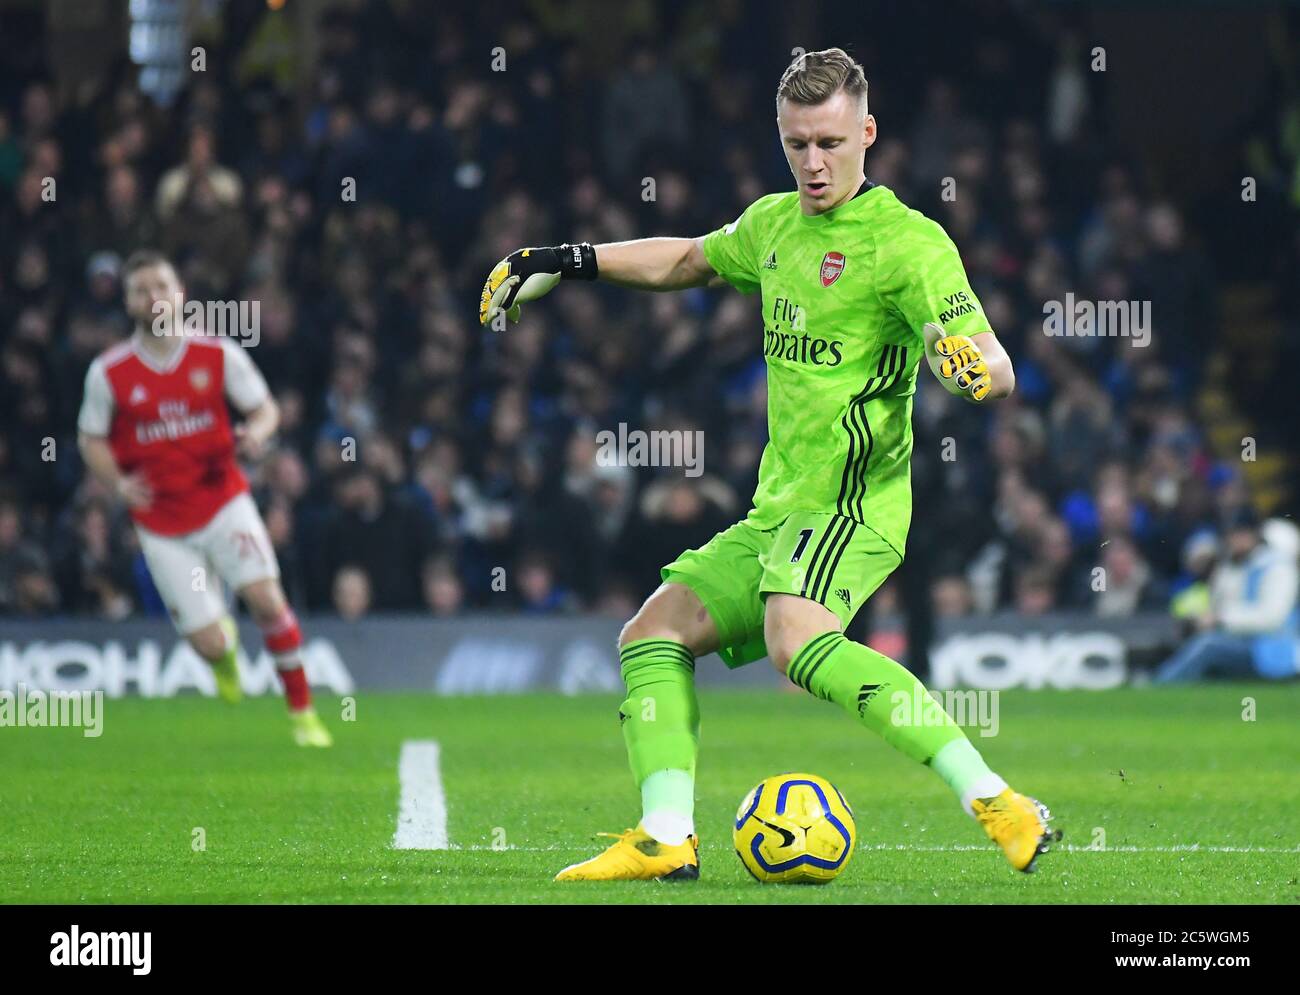 LONDON, ENGLAND - JANUARY 21, 2020: Bernd Leno of Arsenal pictured during the 2019/20 Premier League game between Chelsea FC and Arsenal FC at Stamford Bridge. Stock Photo